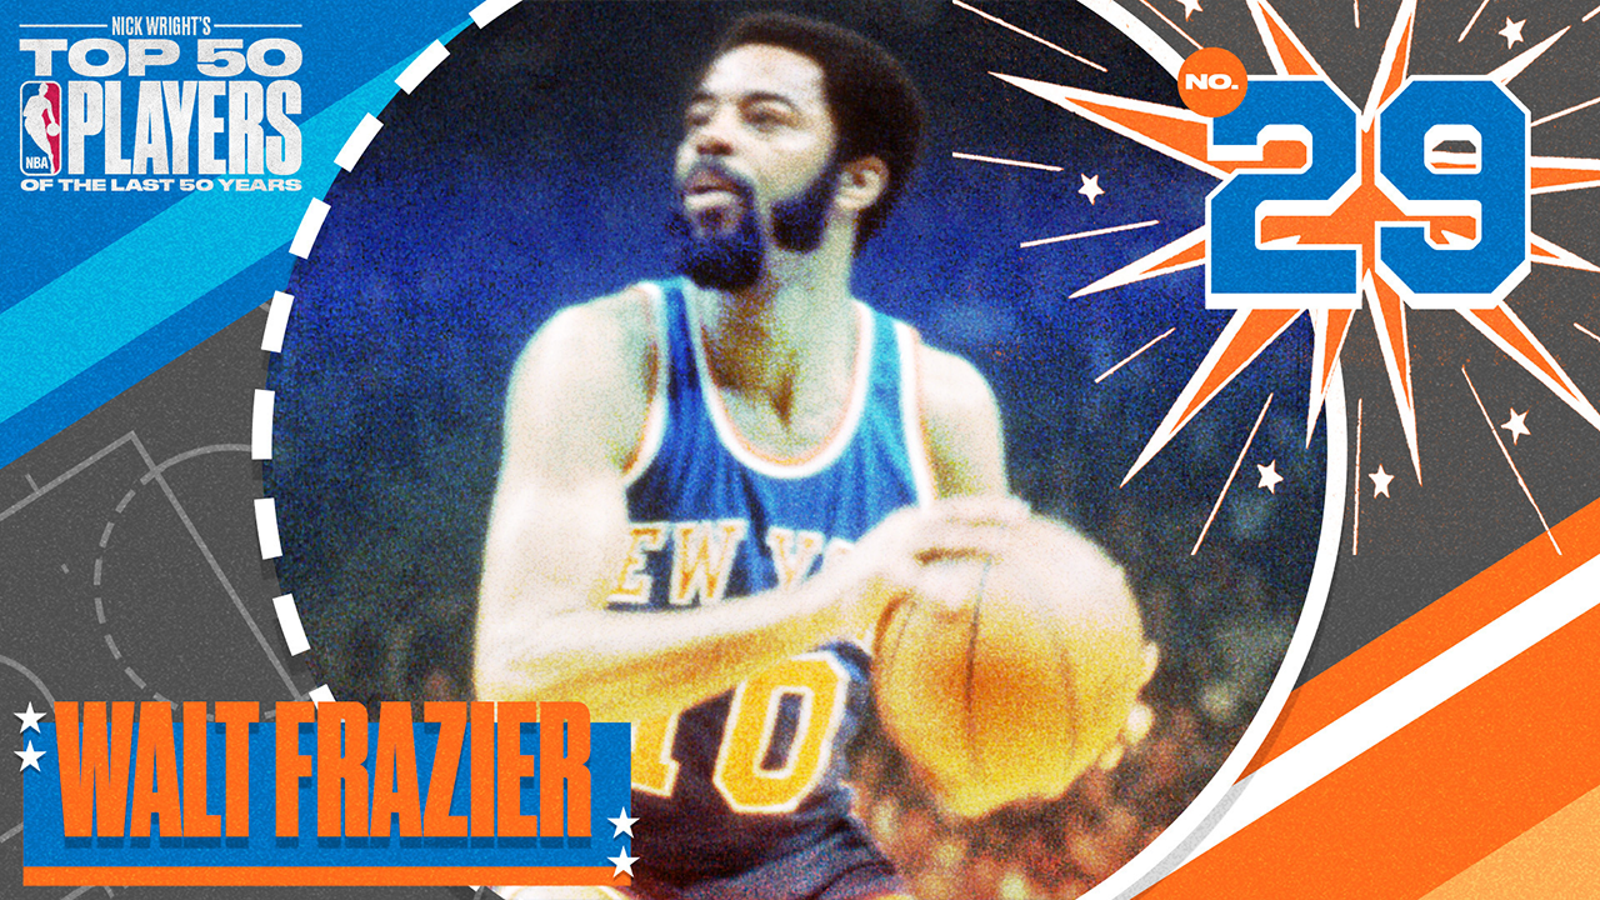 Walt Frazier is No. 29 on Nick Wright's Top 50 NBA Players of the Last 50 Years